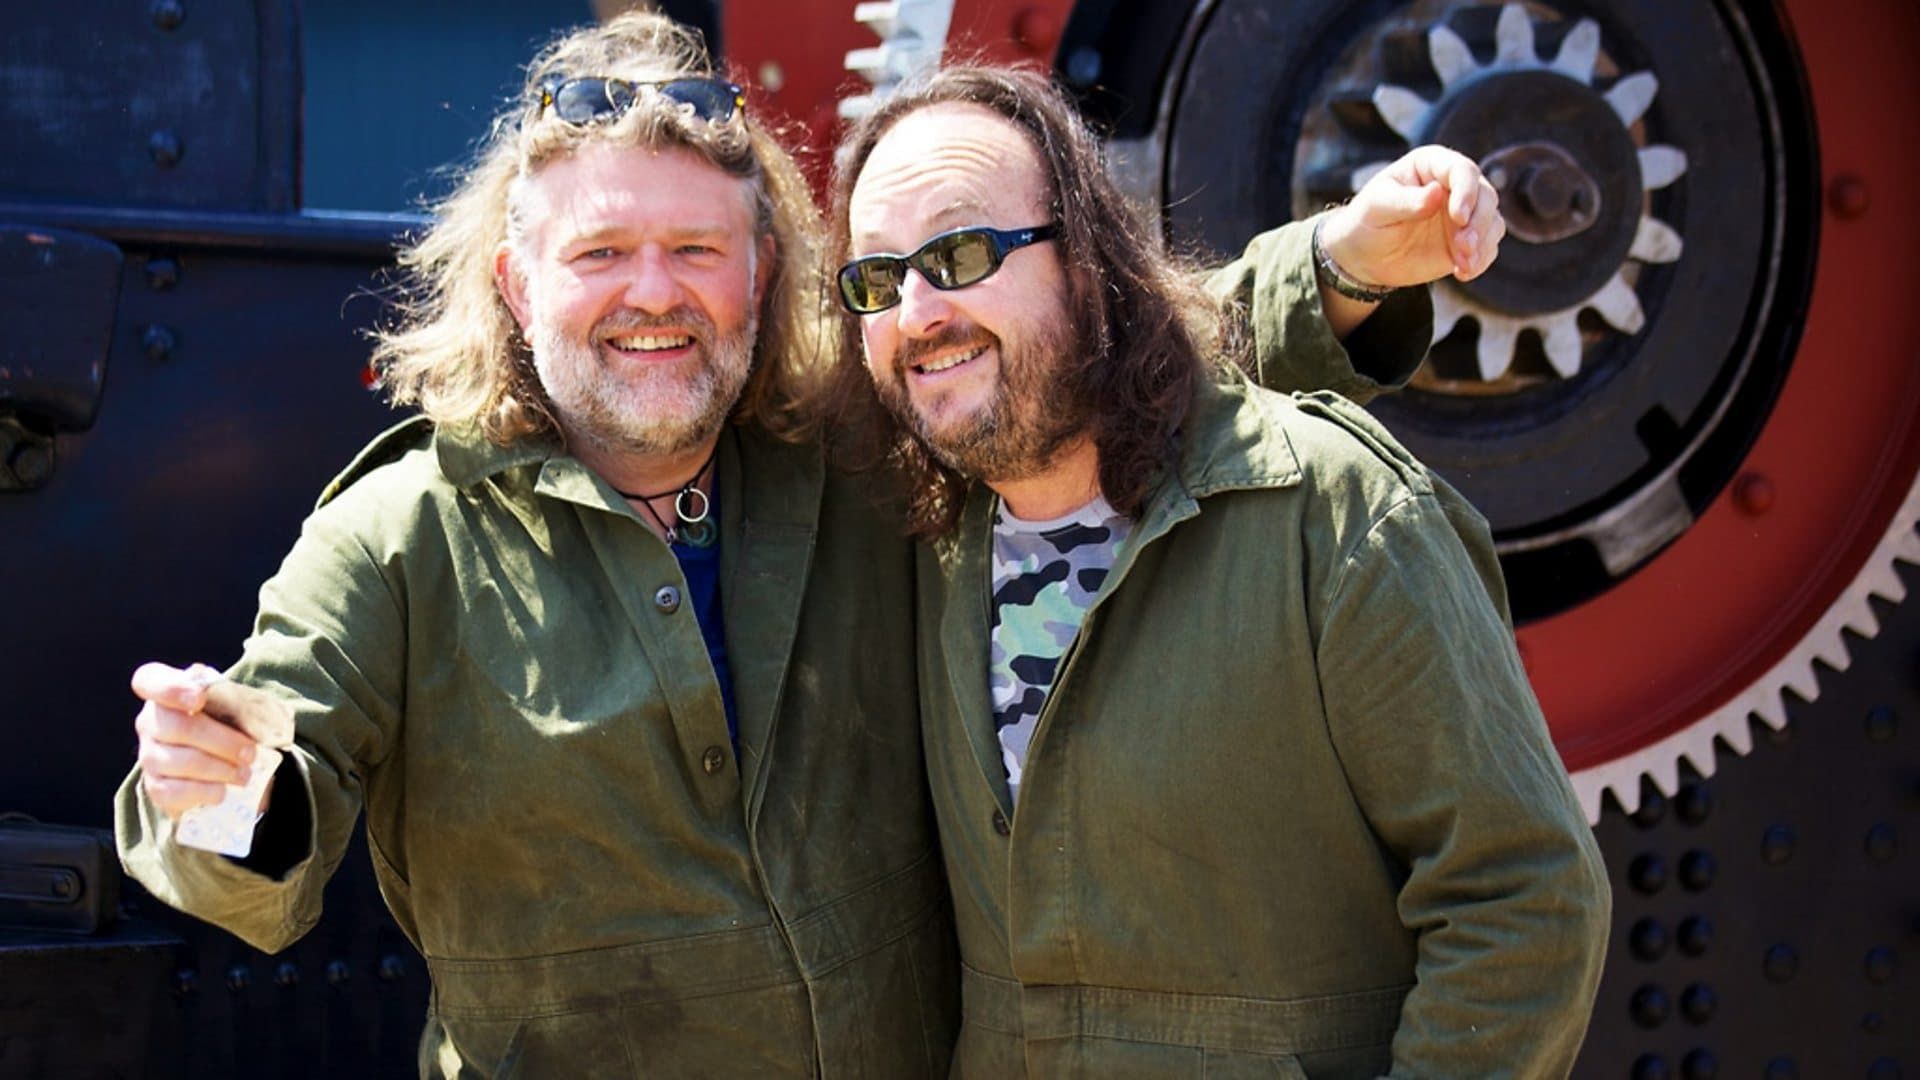 The Hairy Bikers Restoration Road Trip background